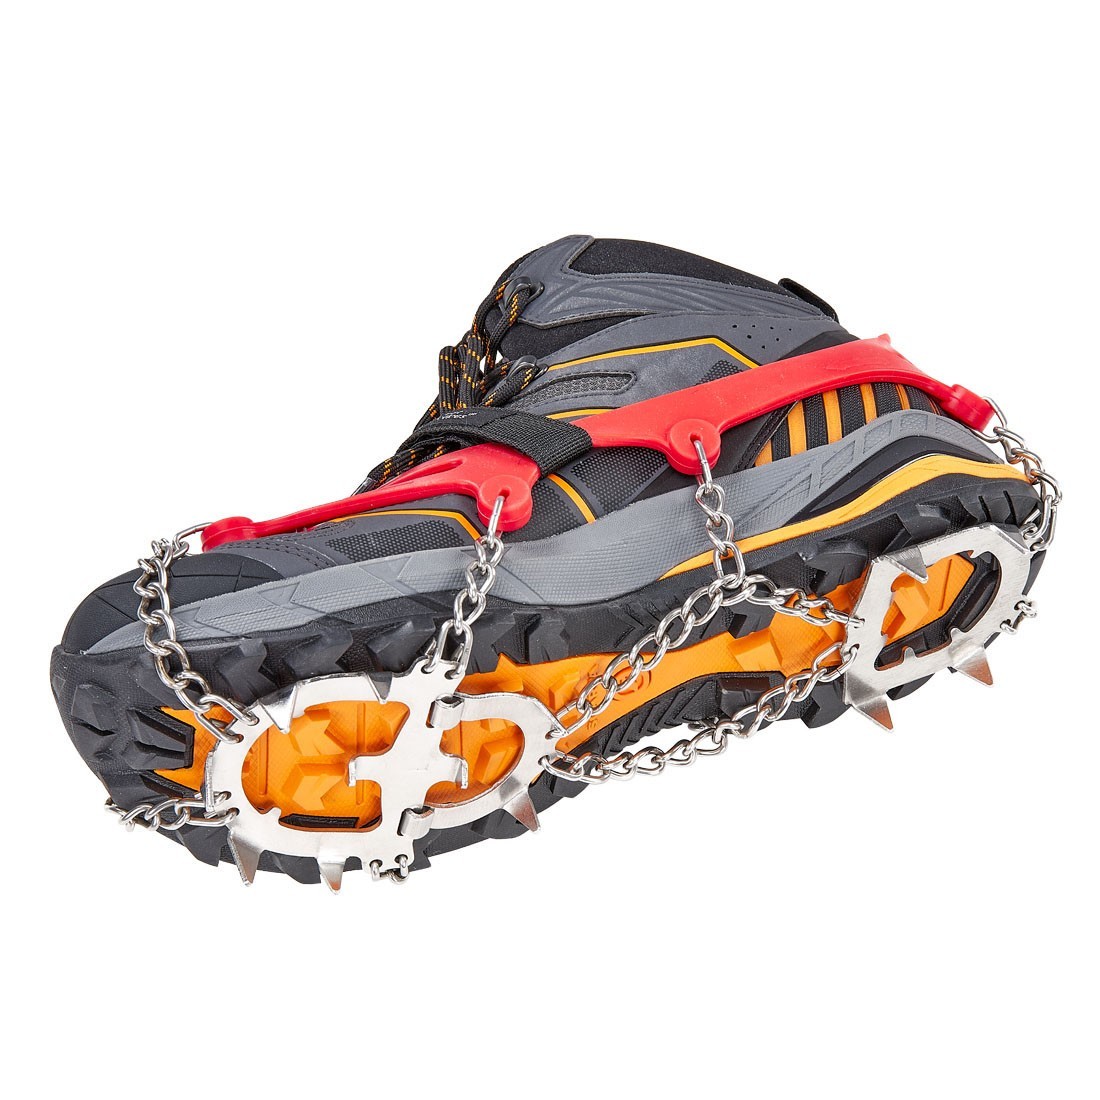 ICE CRAMPONS - Ramponcini con 13 punte